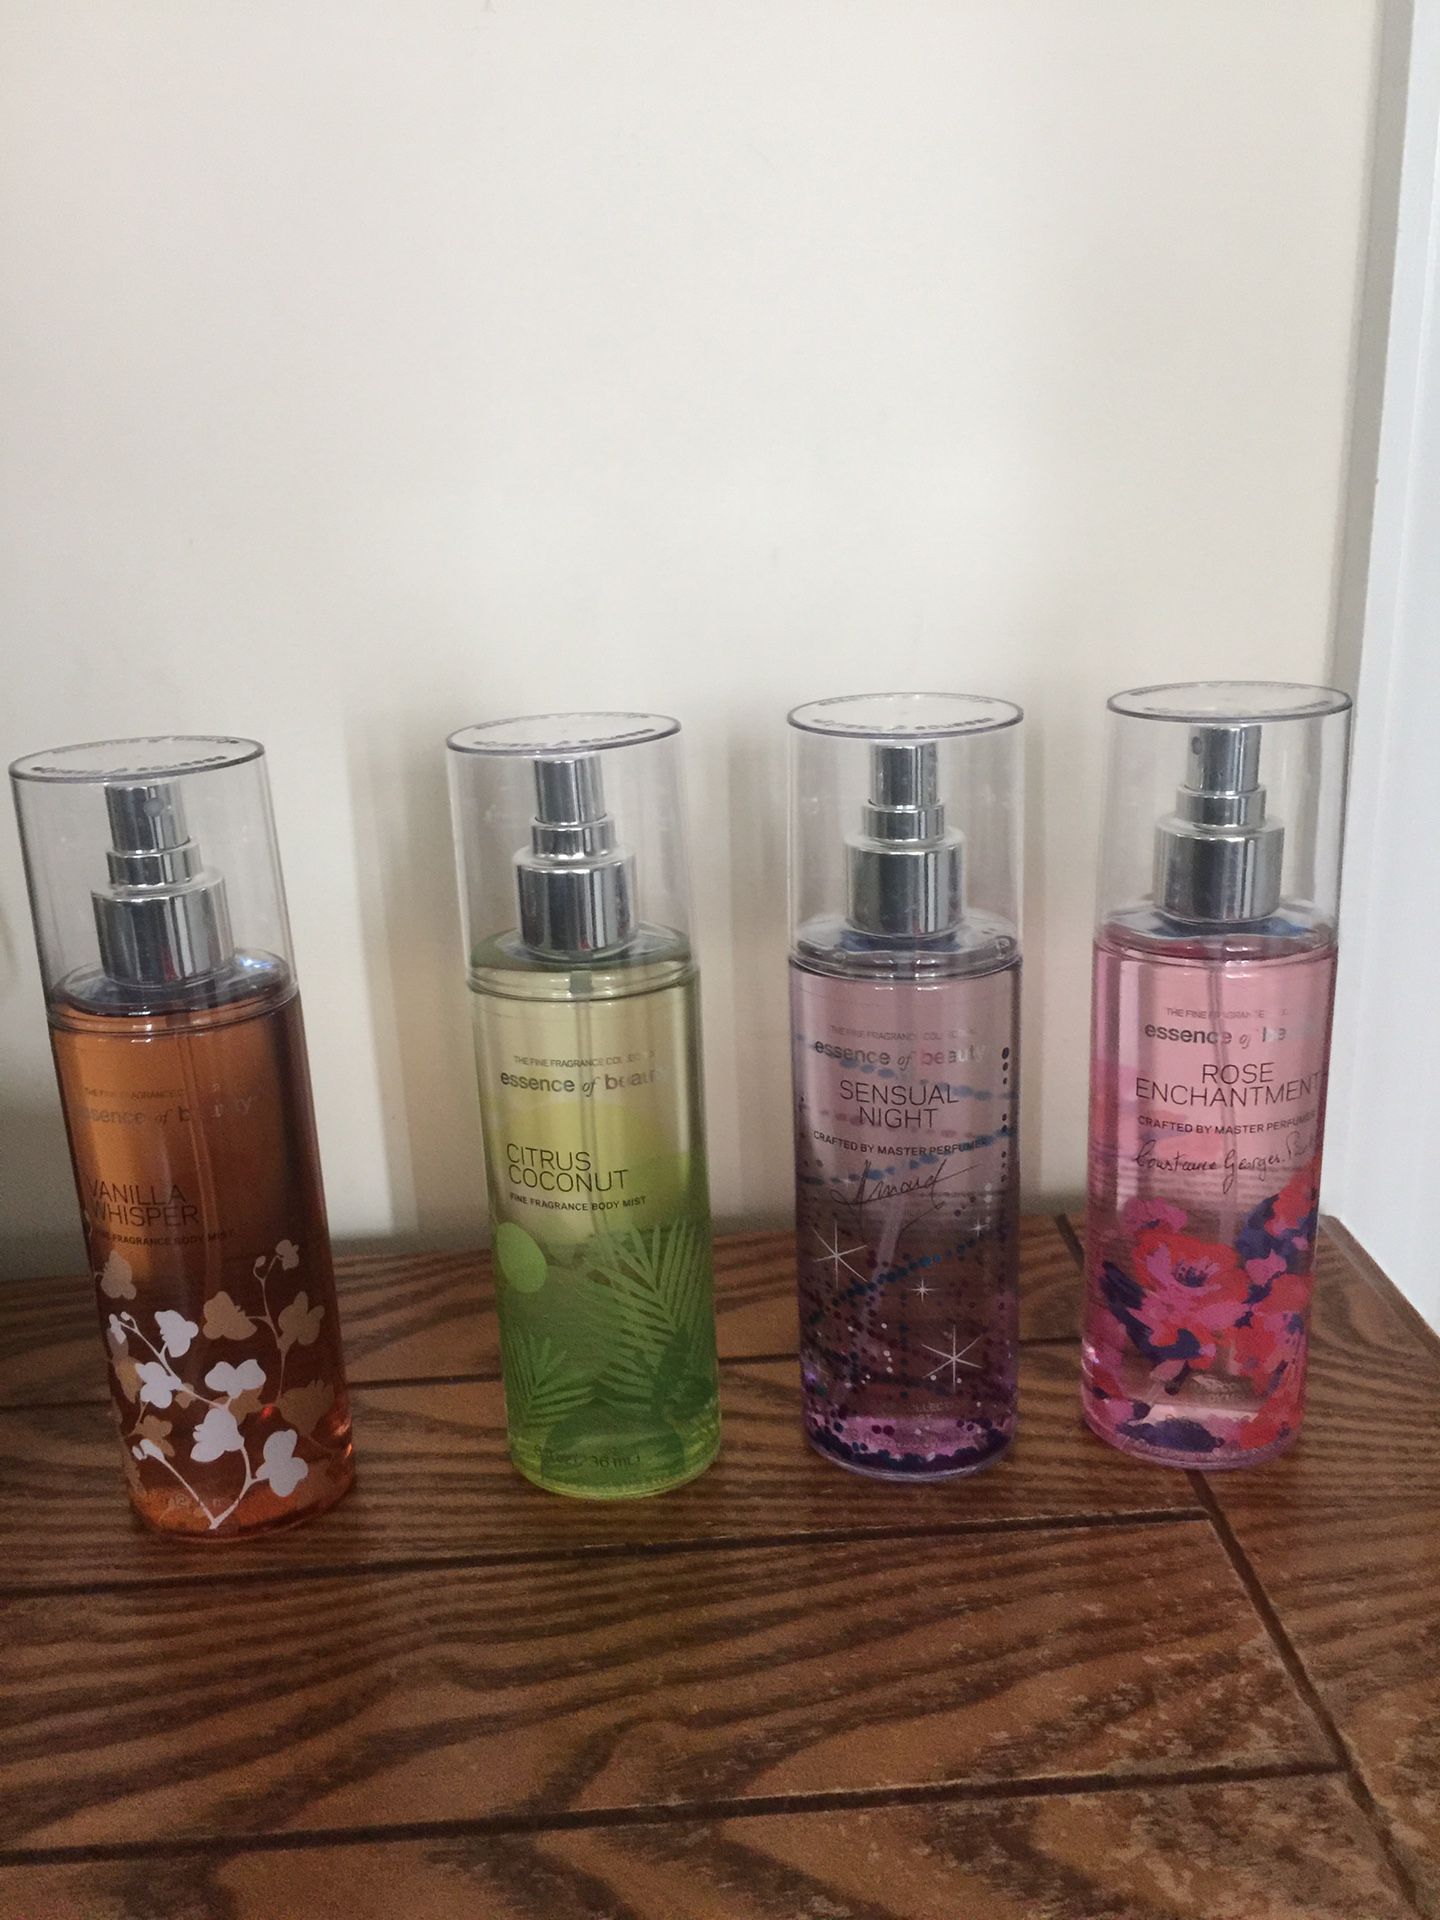 Brand new essence fragrance all 4 for $15